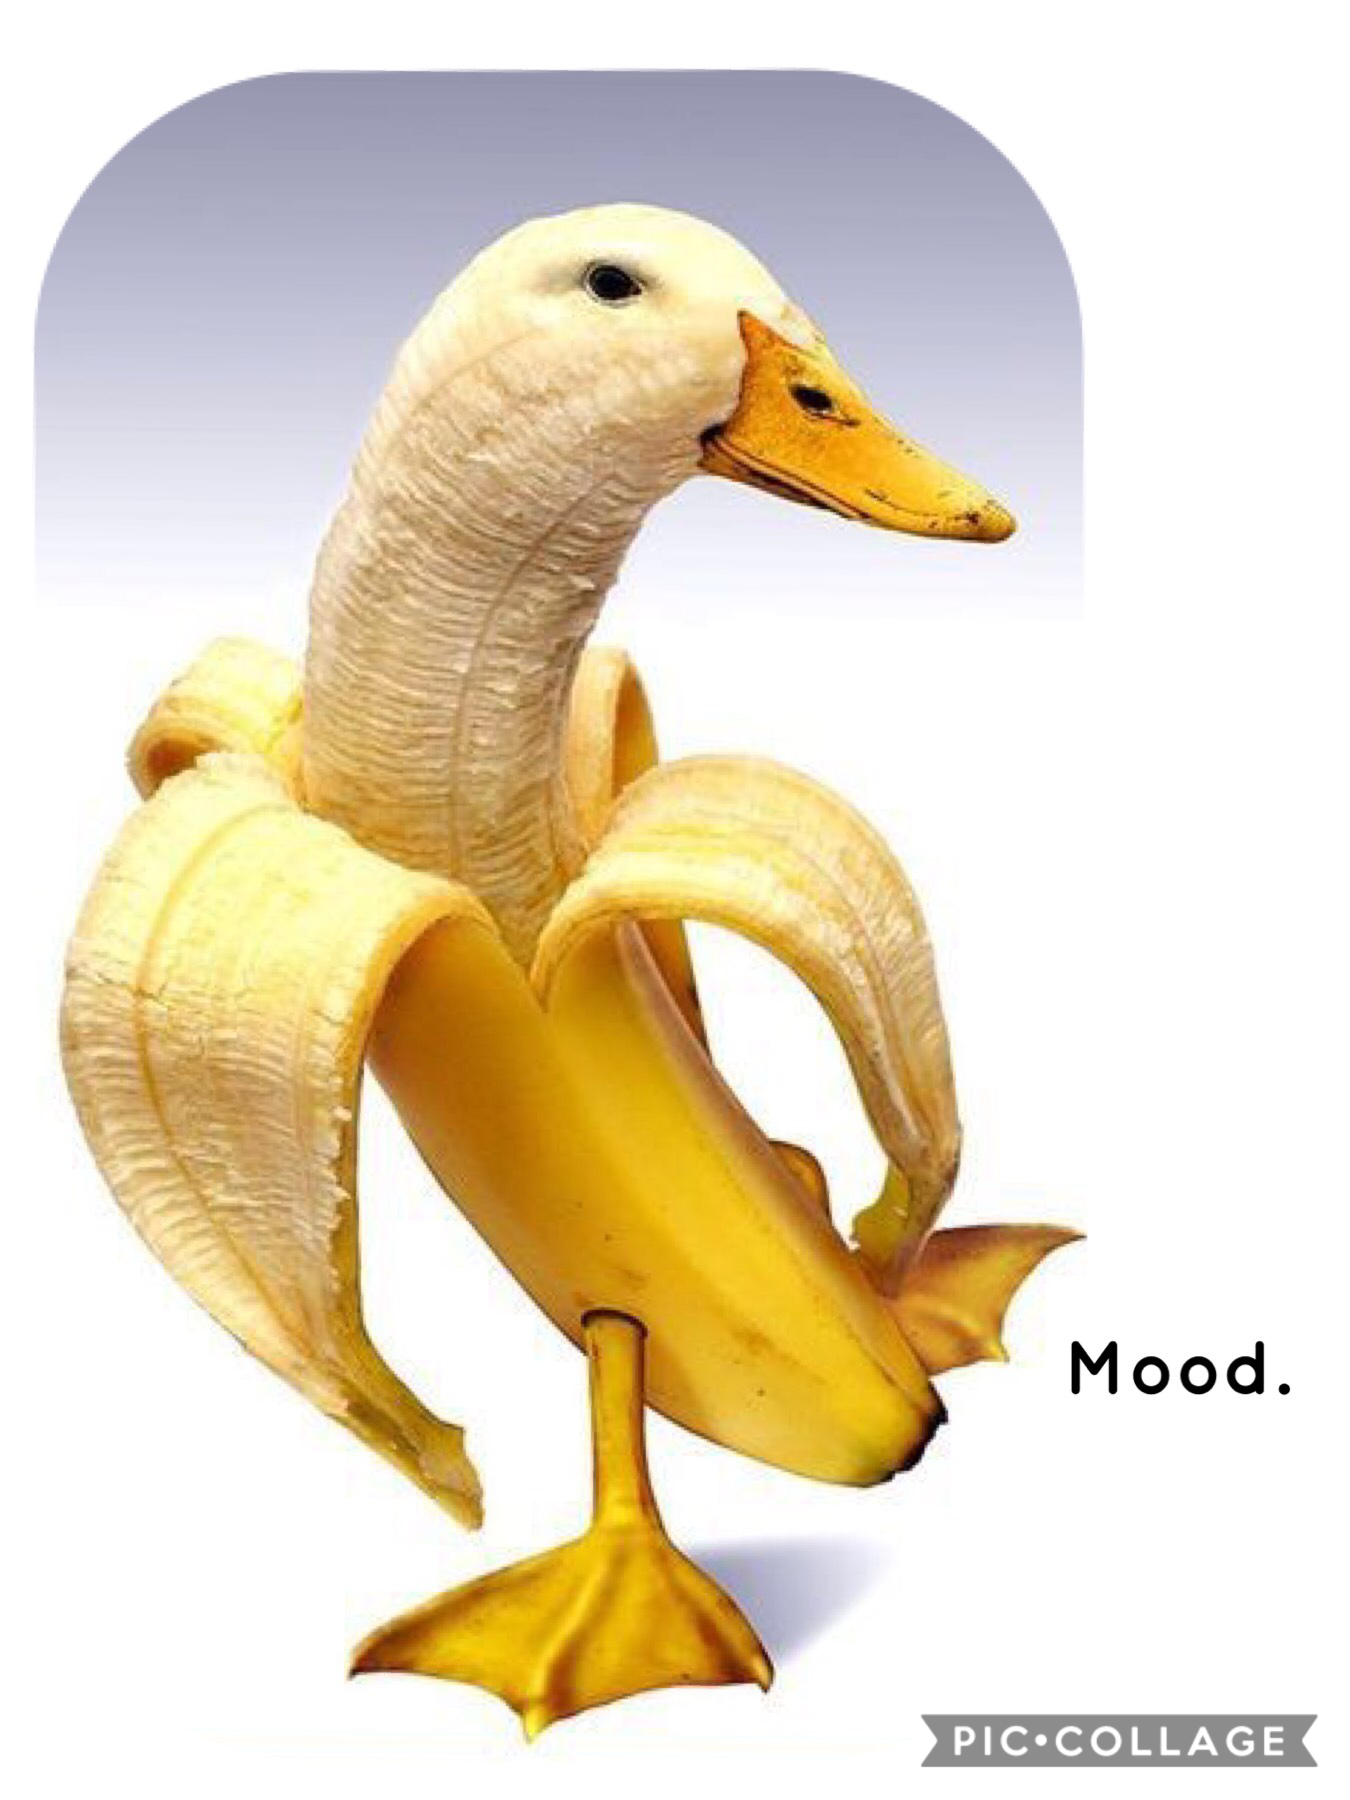 Get ready for it. 
Absurdity central.
First post. 
As if you didn’t laugh.
.
.
.
.
.
. 
#Firstpost #banana #duck 
🦆+🍌= whtujstsaw